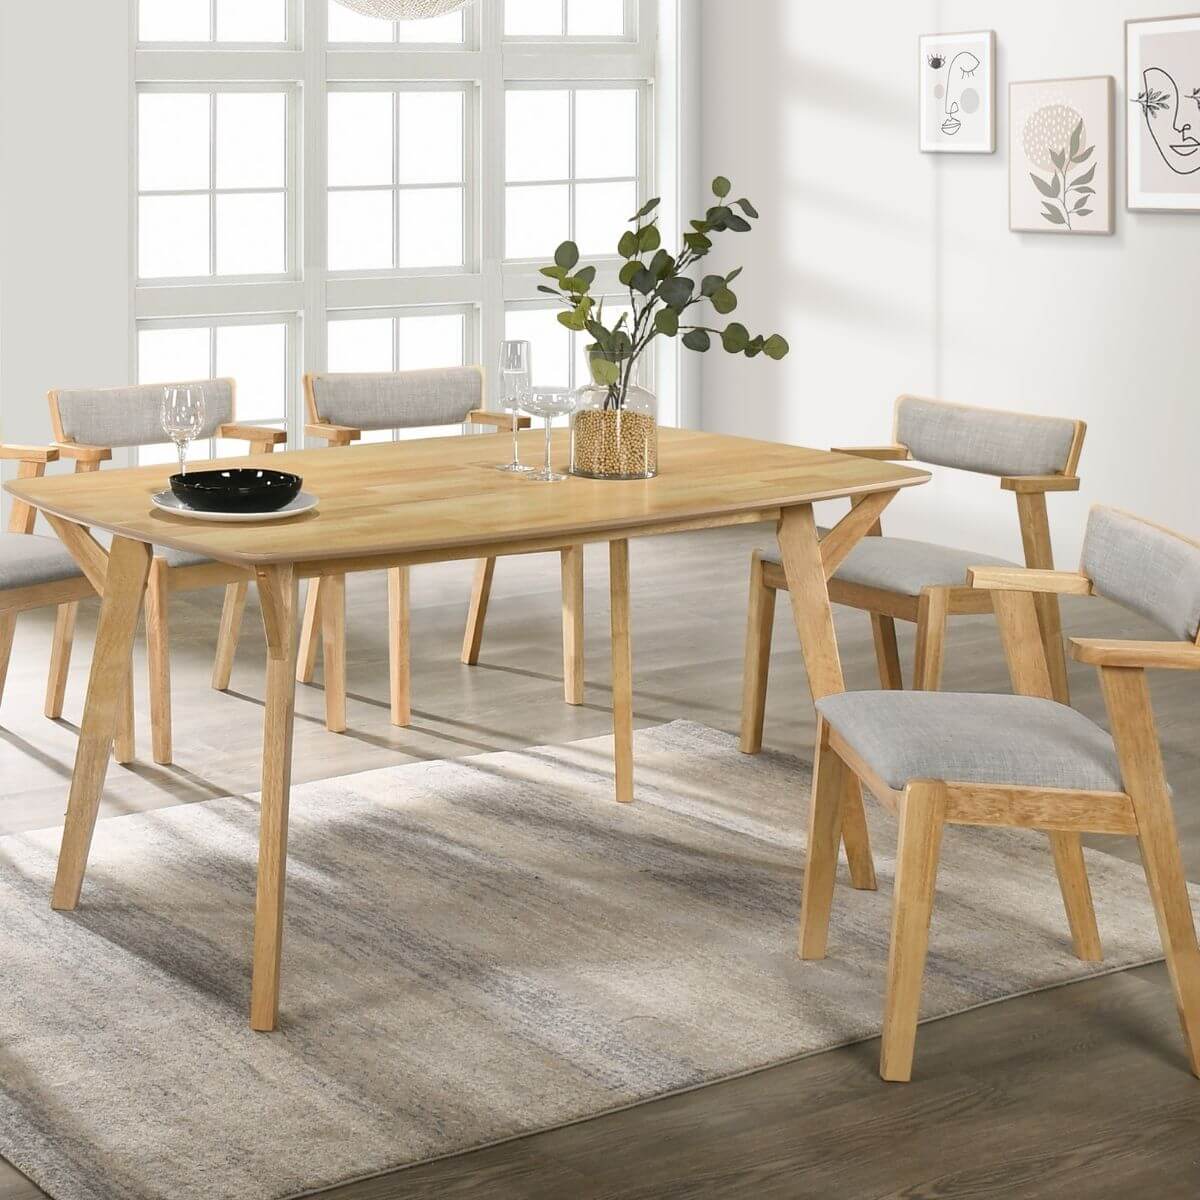 Gather Around an Elegant Oval Dining Table - 6-Seater in Natural Color-Upinteriors